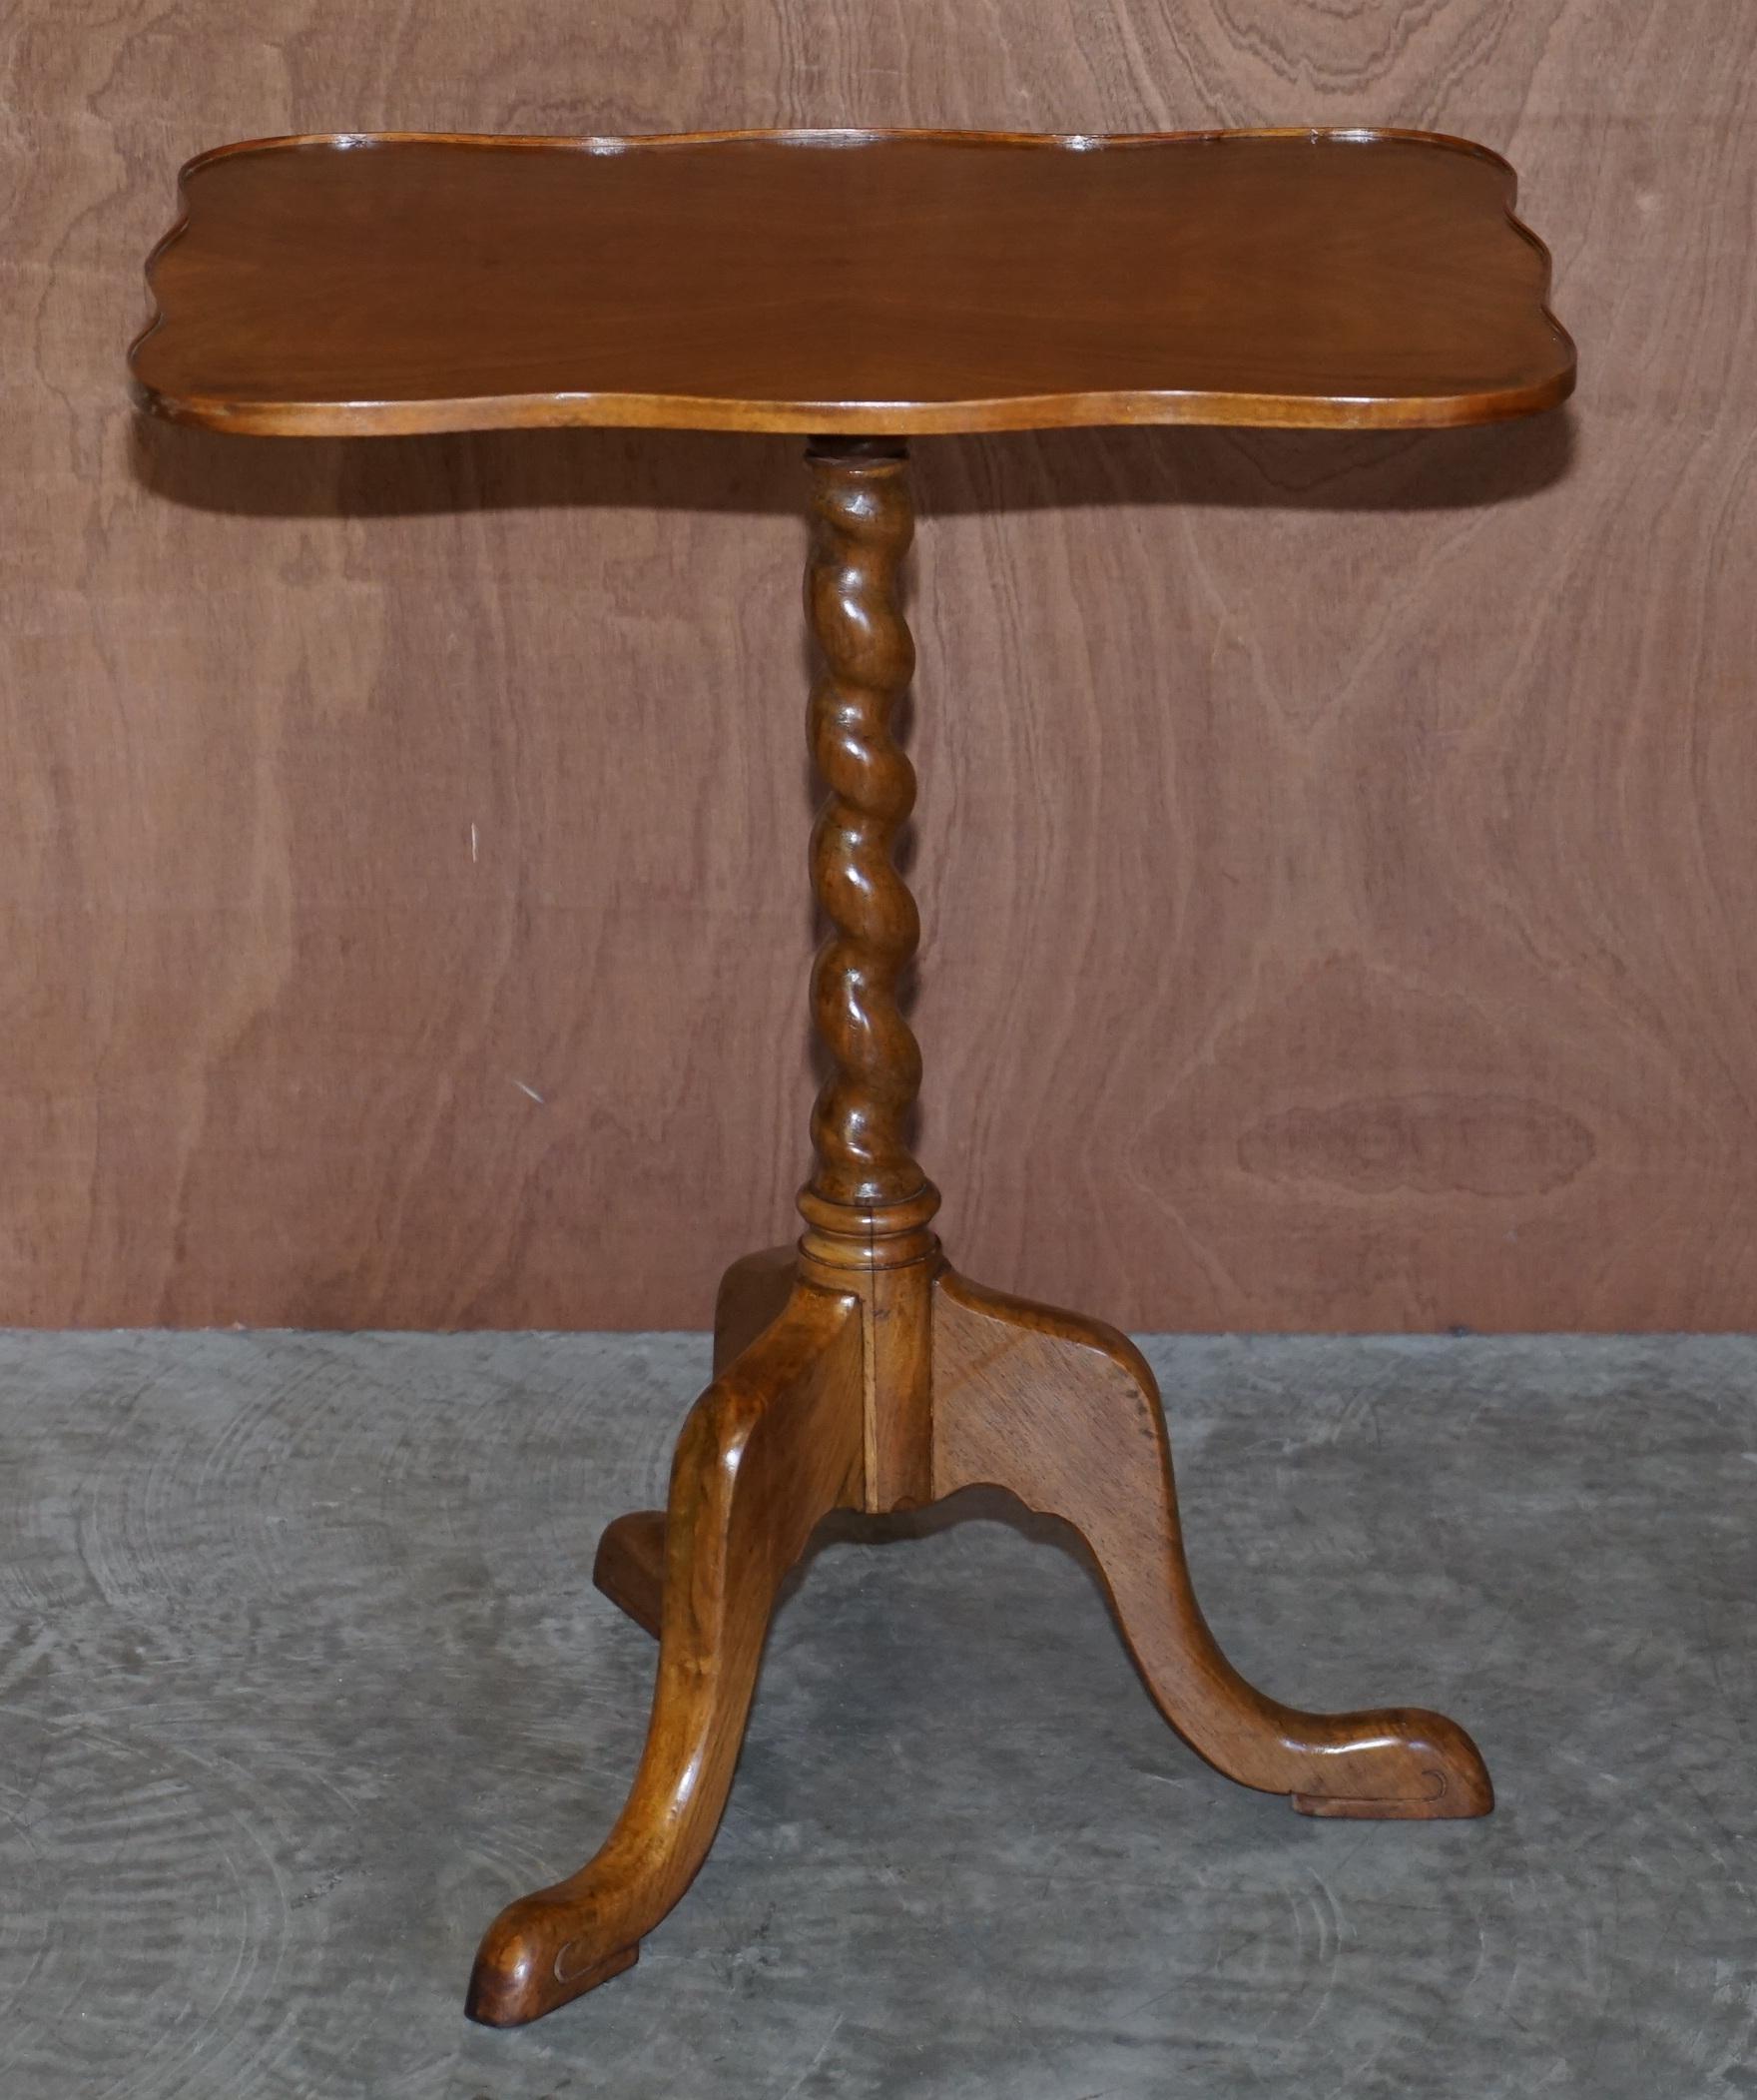 We are delighted to offer for sale this stunning original restored Victorian circa 1880 walnut tilt top tripod side occasional table

A very good looking and well made piece, ideally suited for serving lunch and so on or perhaps a game of bridge!